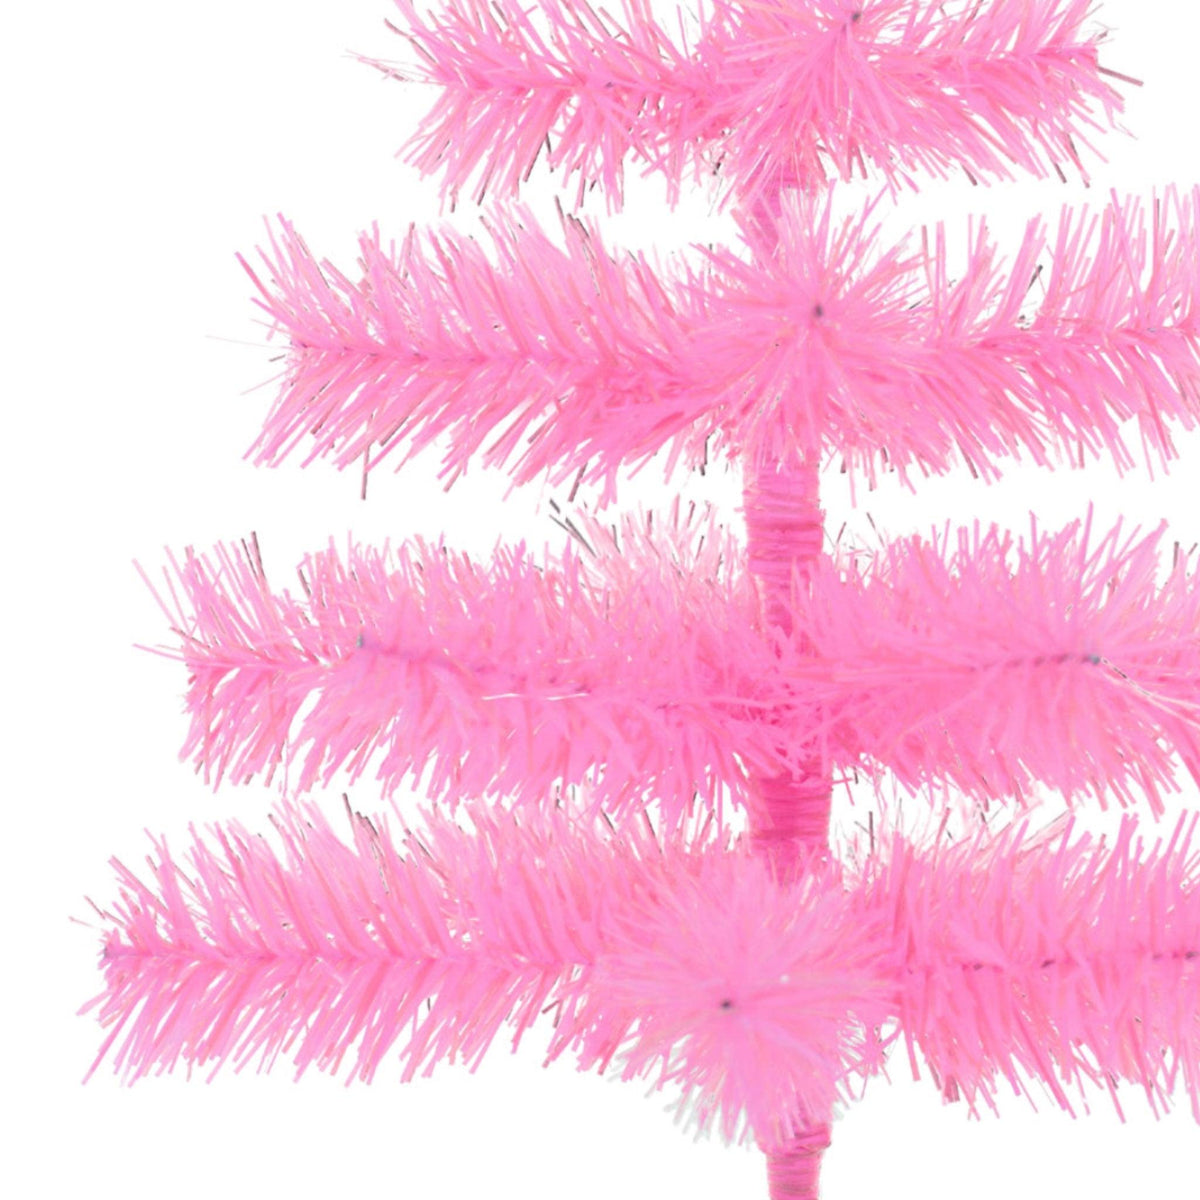 Middle section of the 18in tall pink christmas tree. Each tree has a bunch of tips to hang your favorite holiday ornaments from.